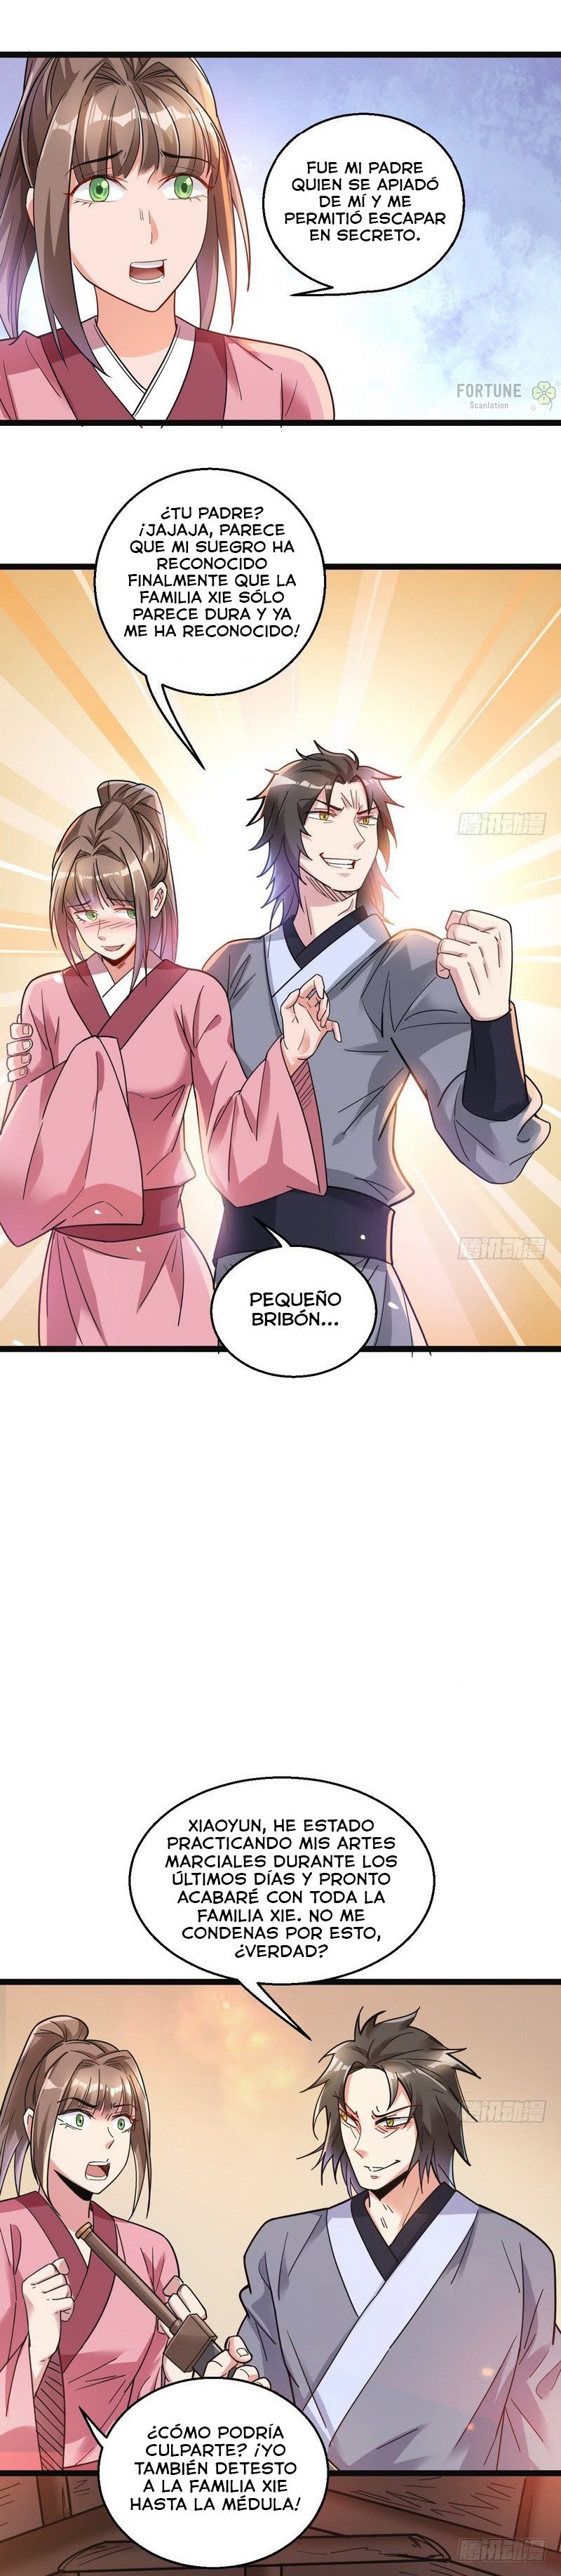 Manga Soy un dios maligno Chapter 7 image number 7